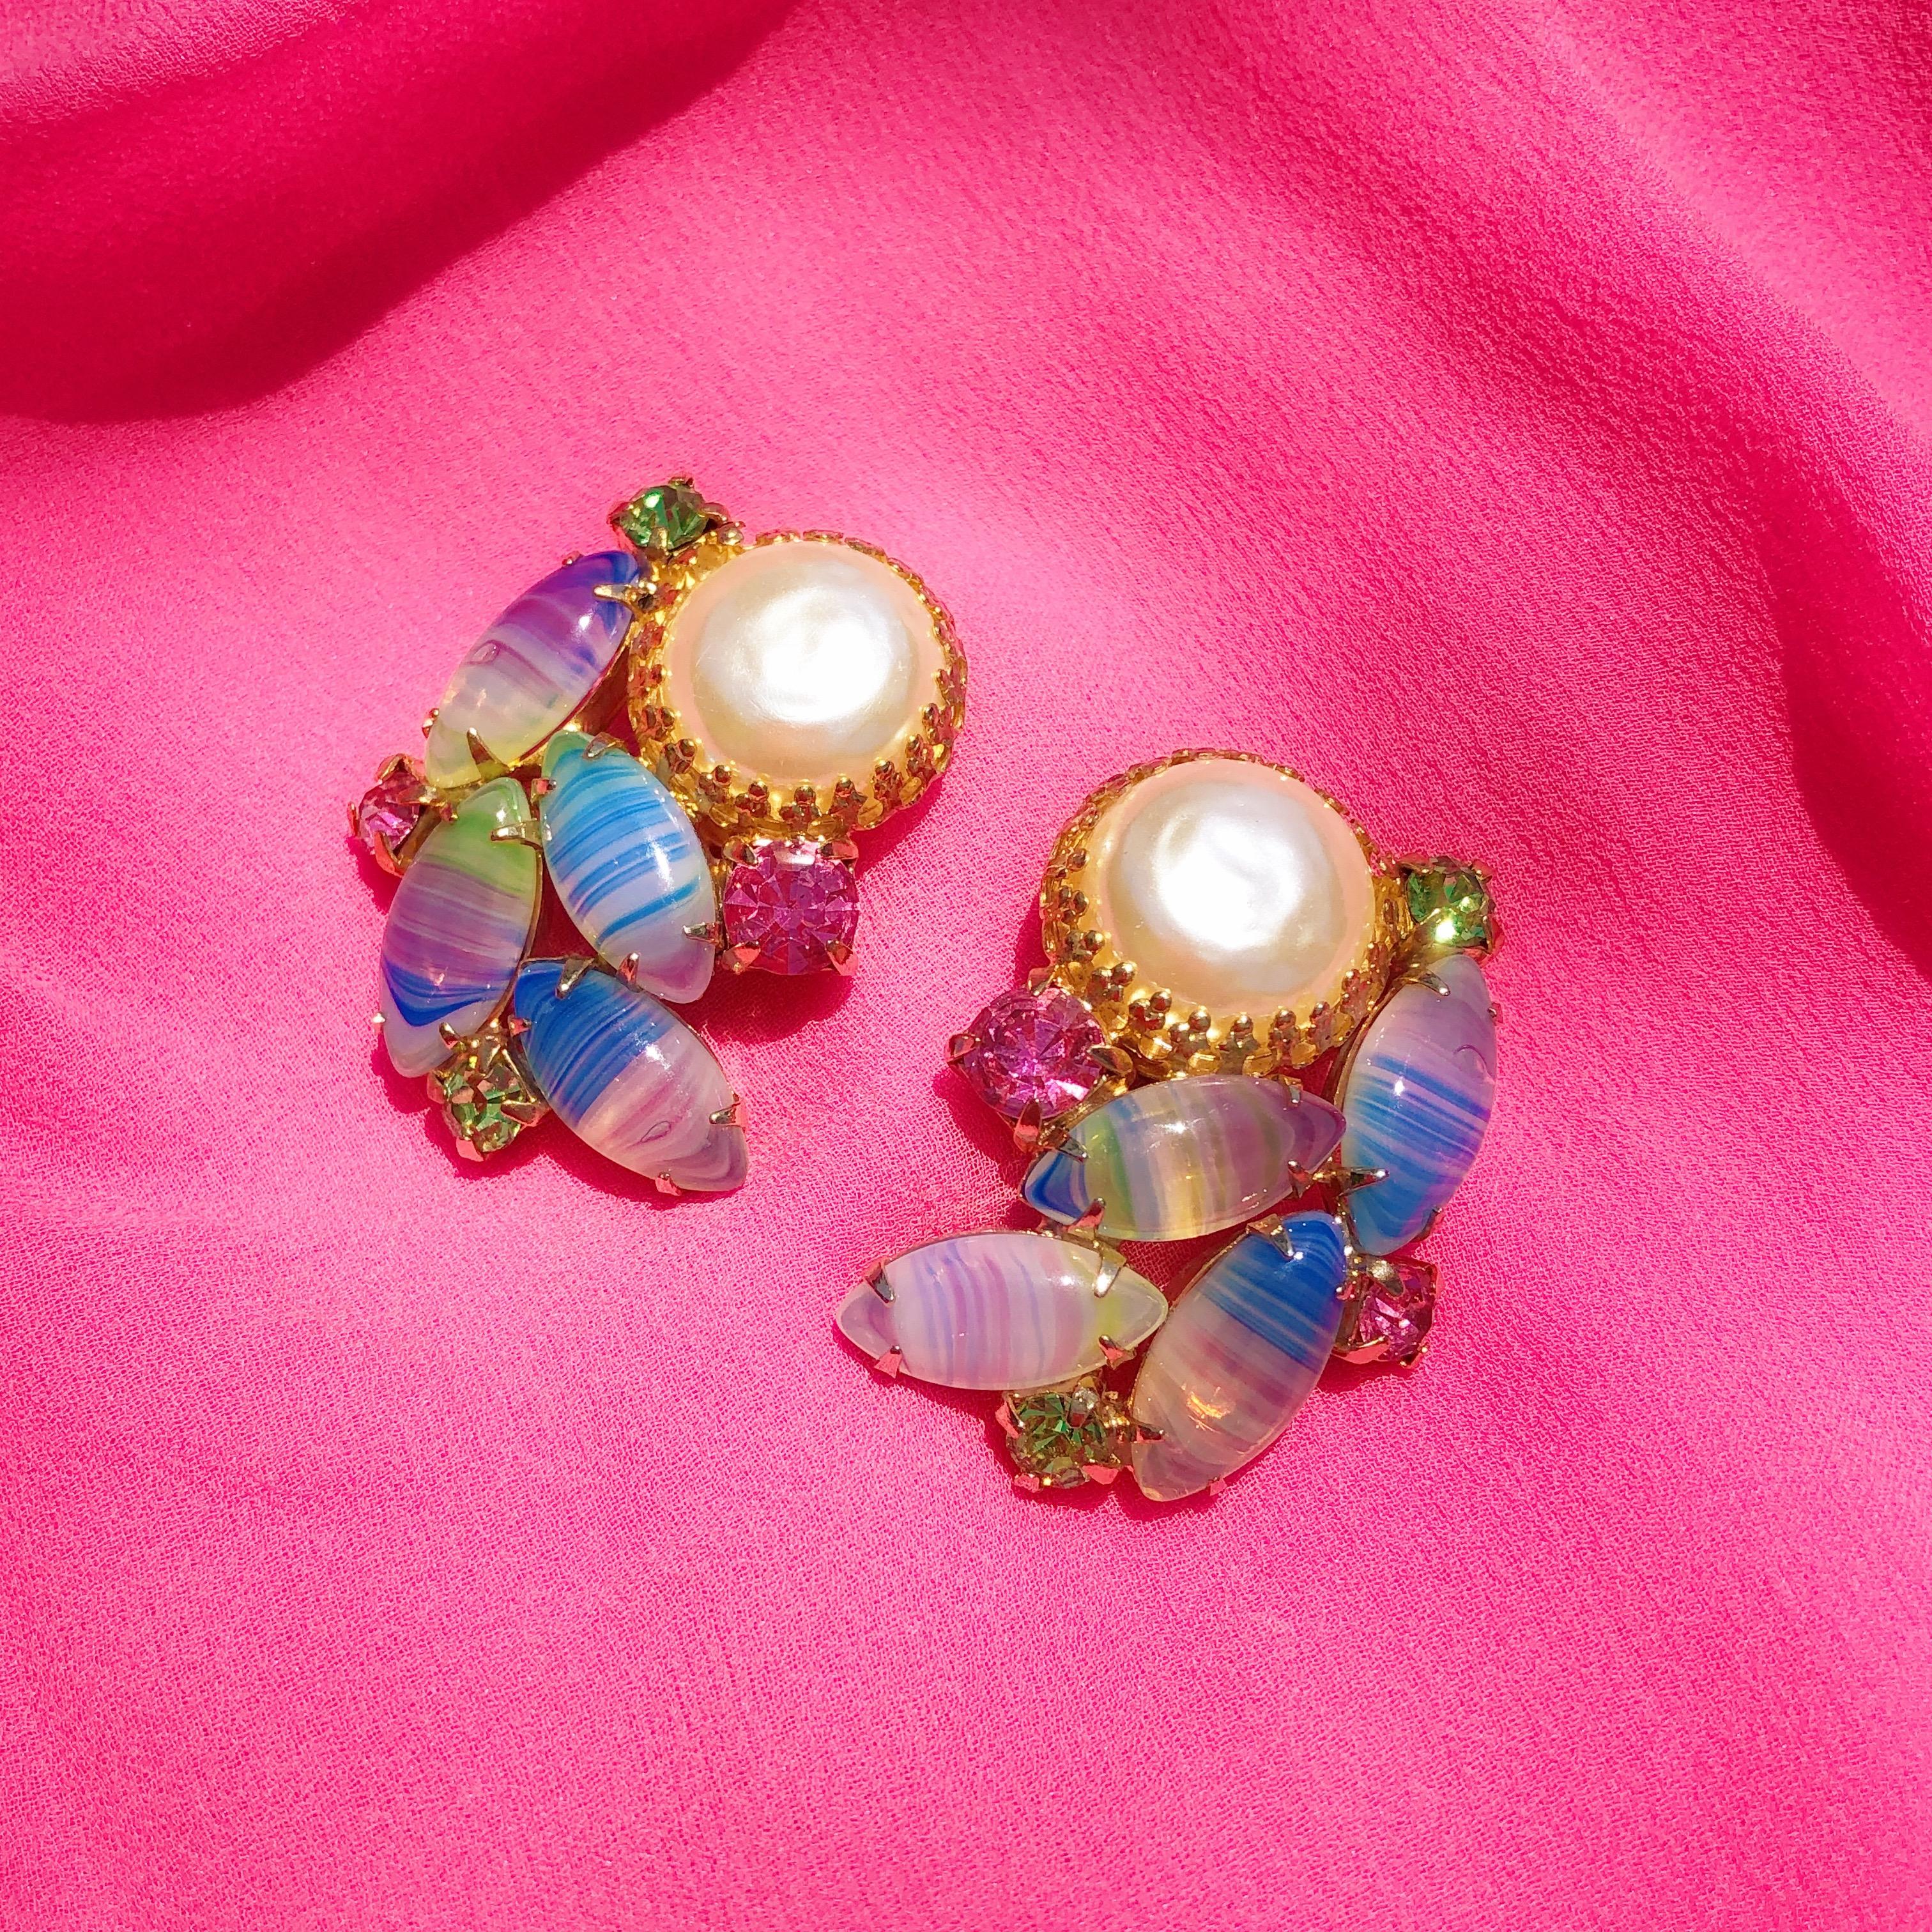 These stunning vintage Juliana-style statement earrings from the mid-century era make a truly unique statement! A cluster of multi-colored pastel Givre art glass stones, accented with pink and green rhinestones and a large faux Mabe pearl are prong